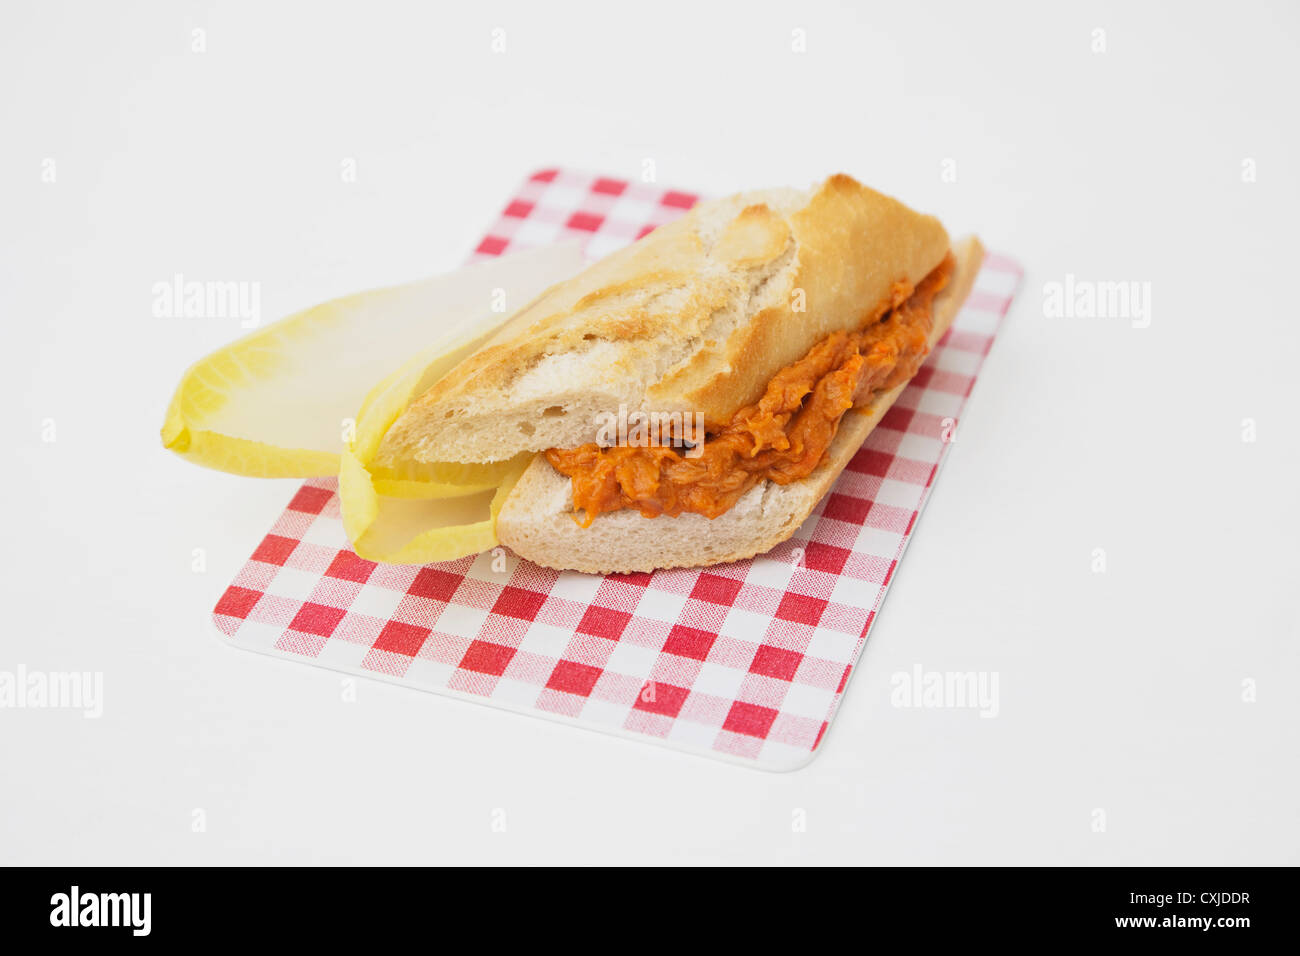 Baguette sandwich with tuna and tomato on board Stock Photo